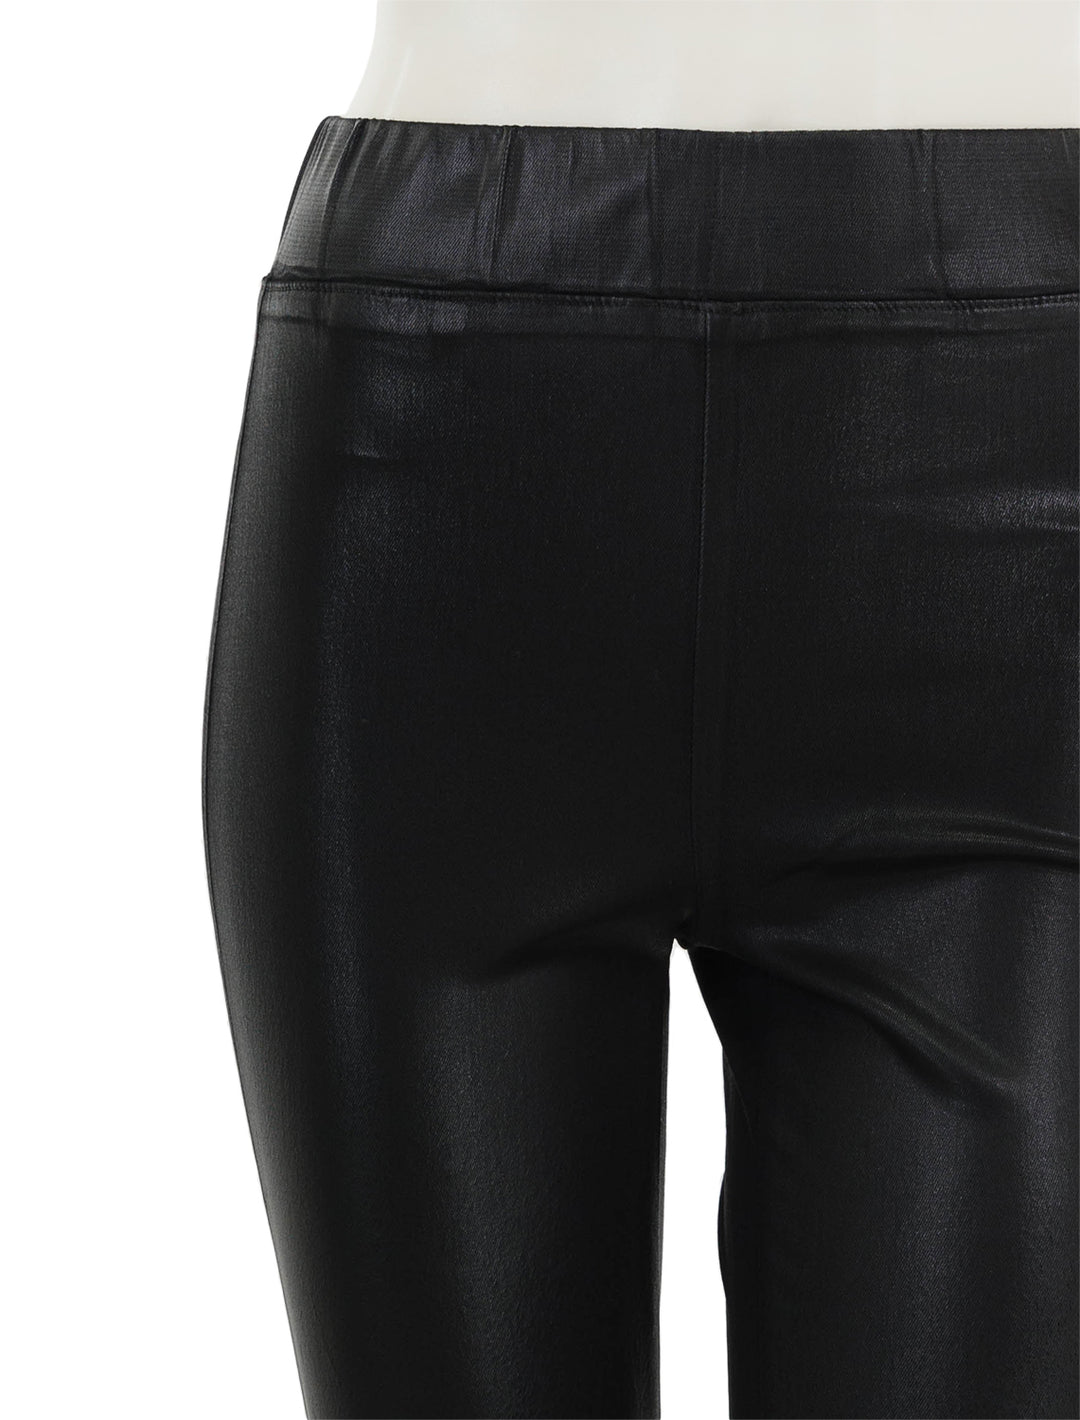 Close-up view of L'agence's rochelle high rise pull-on jean in noir coated.